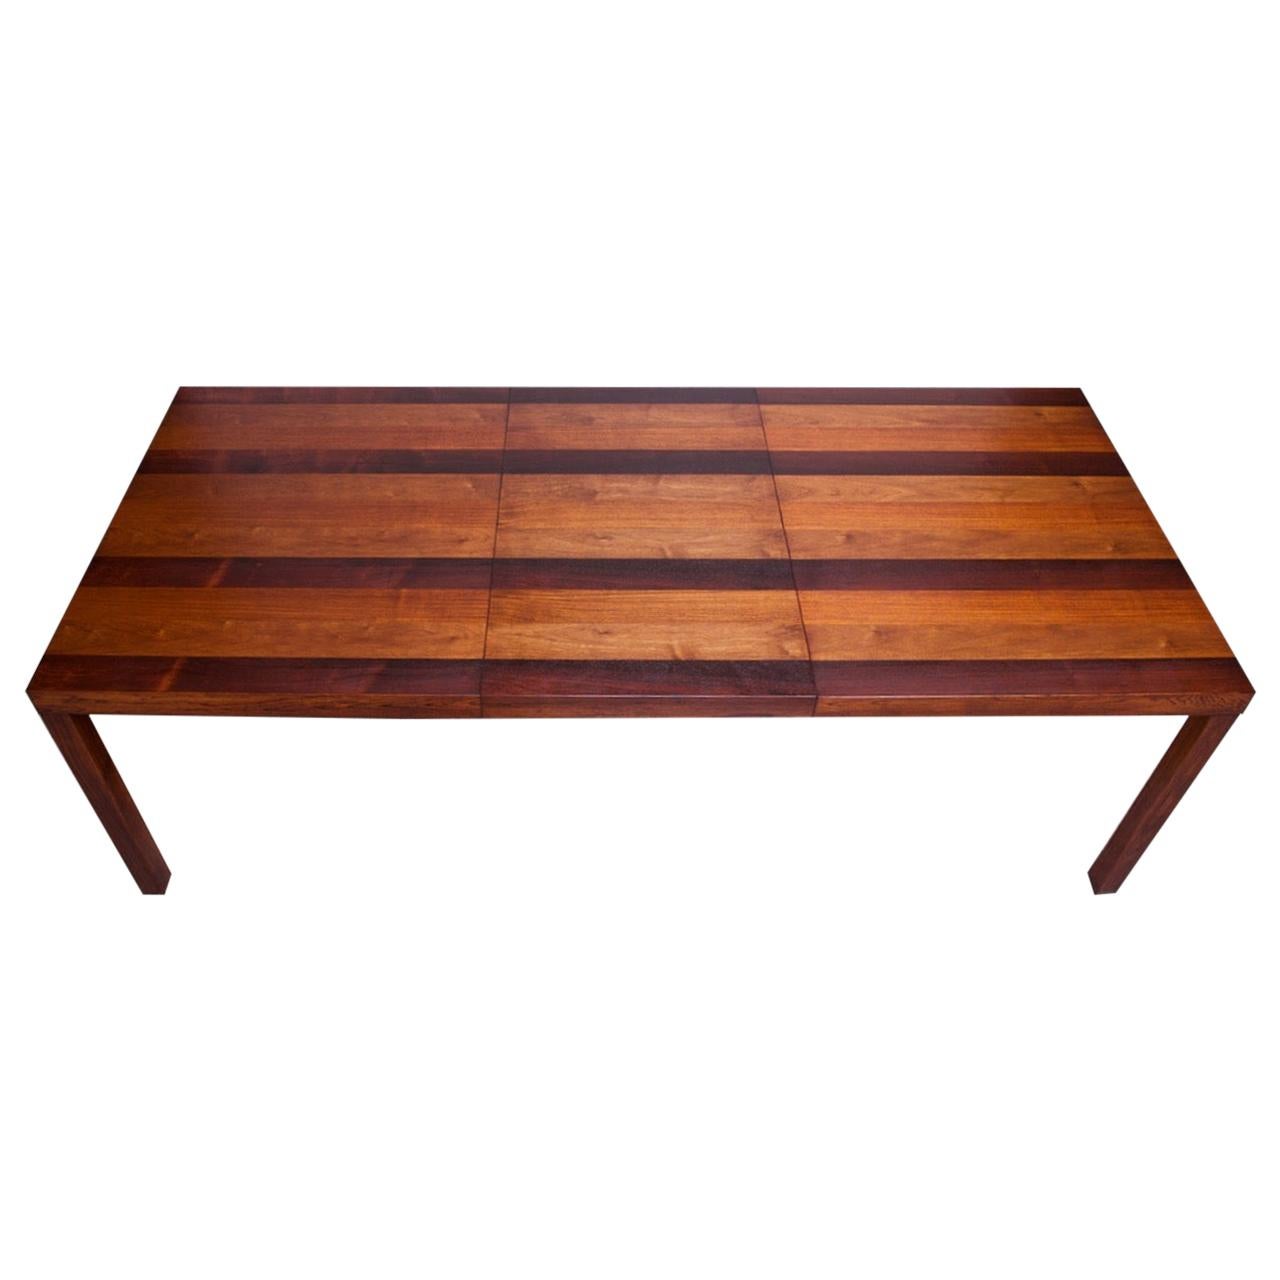 Milo Baughman Attributed Mixed Wood Expandable Dining Table for Directional